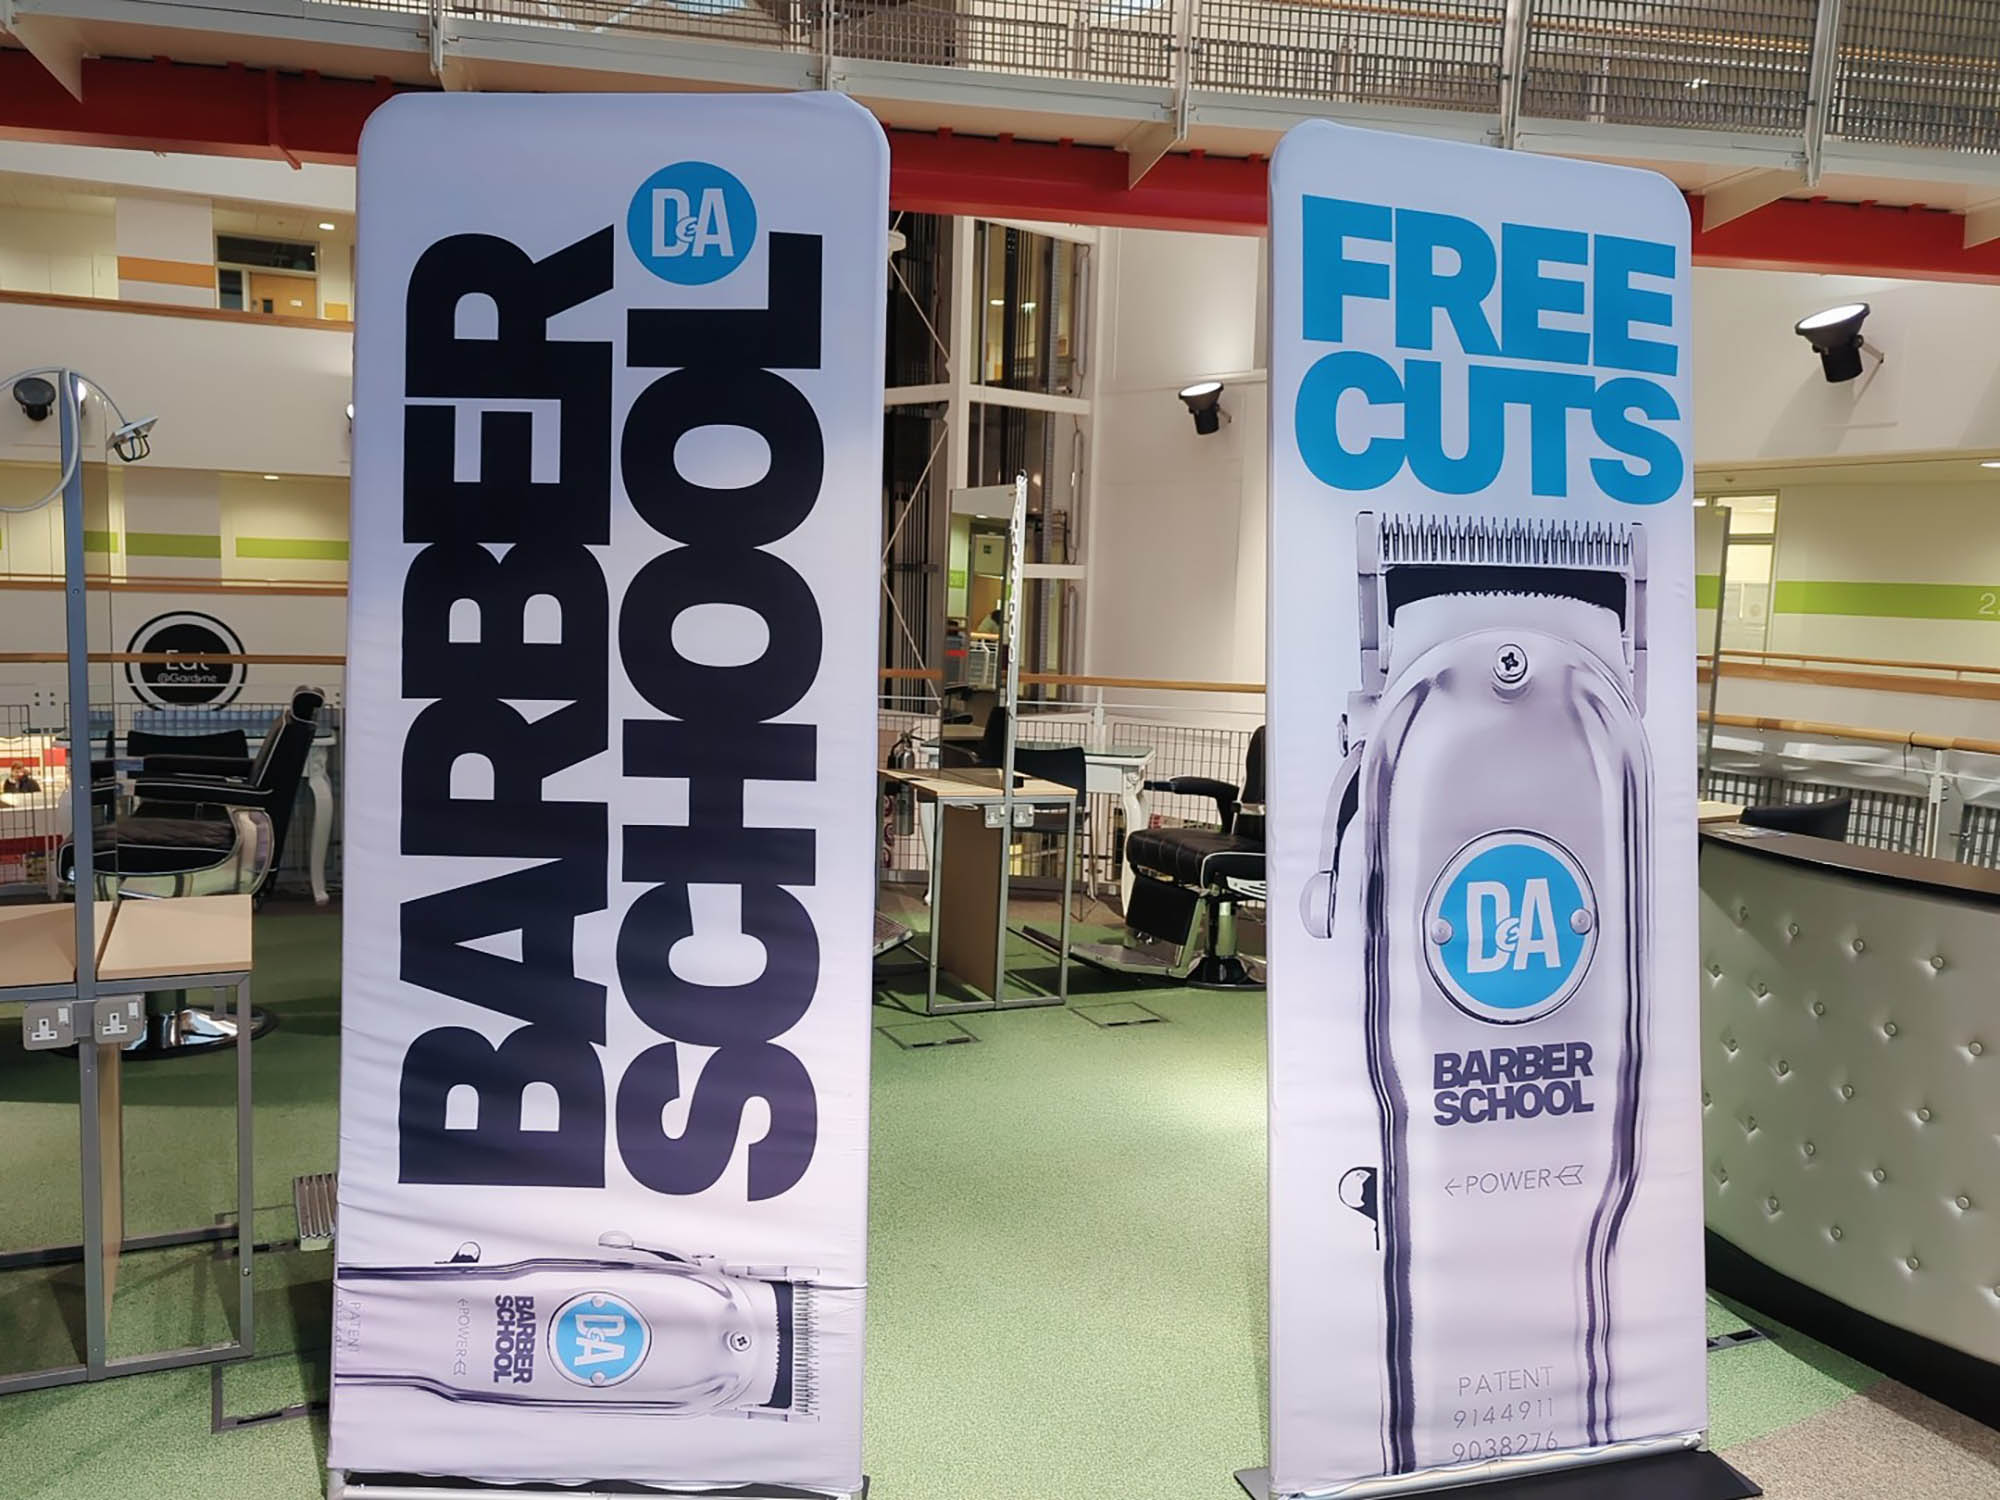 Photo of two pop up banners for D&A Barber School & free haircuts)